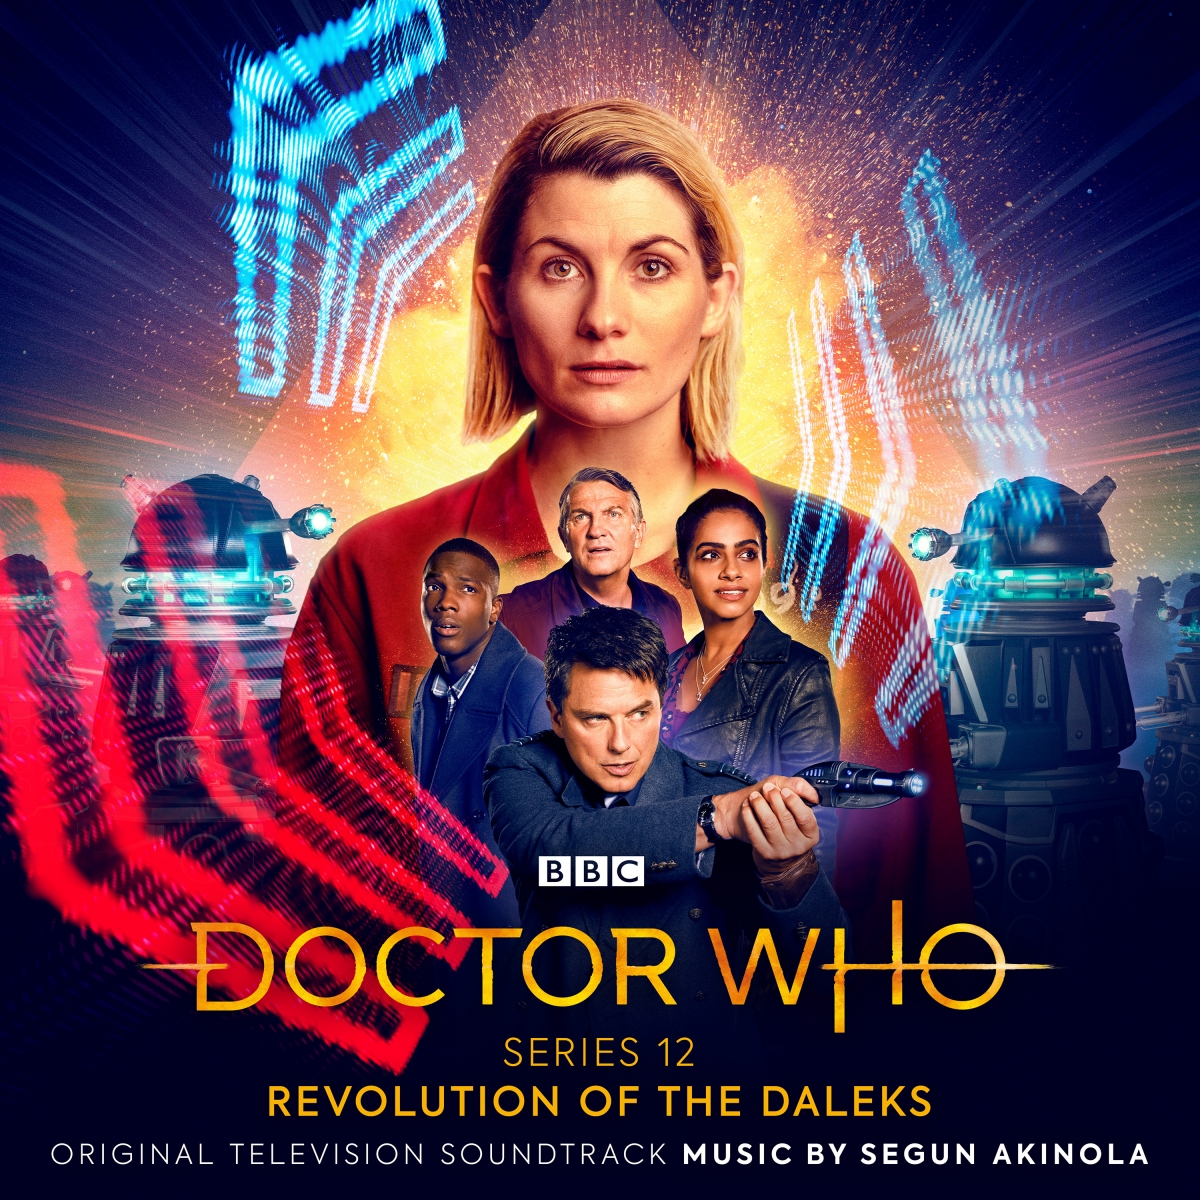 &#039;Revolution of the Daleks&#039; Album out now!